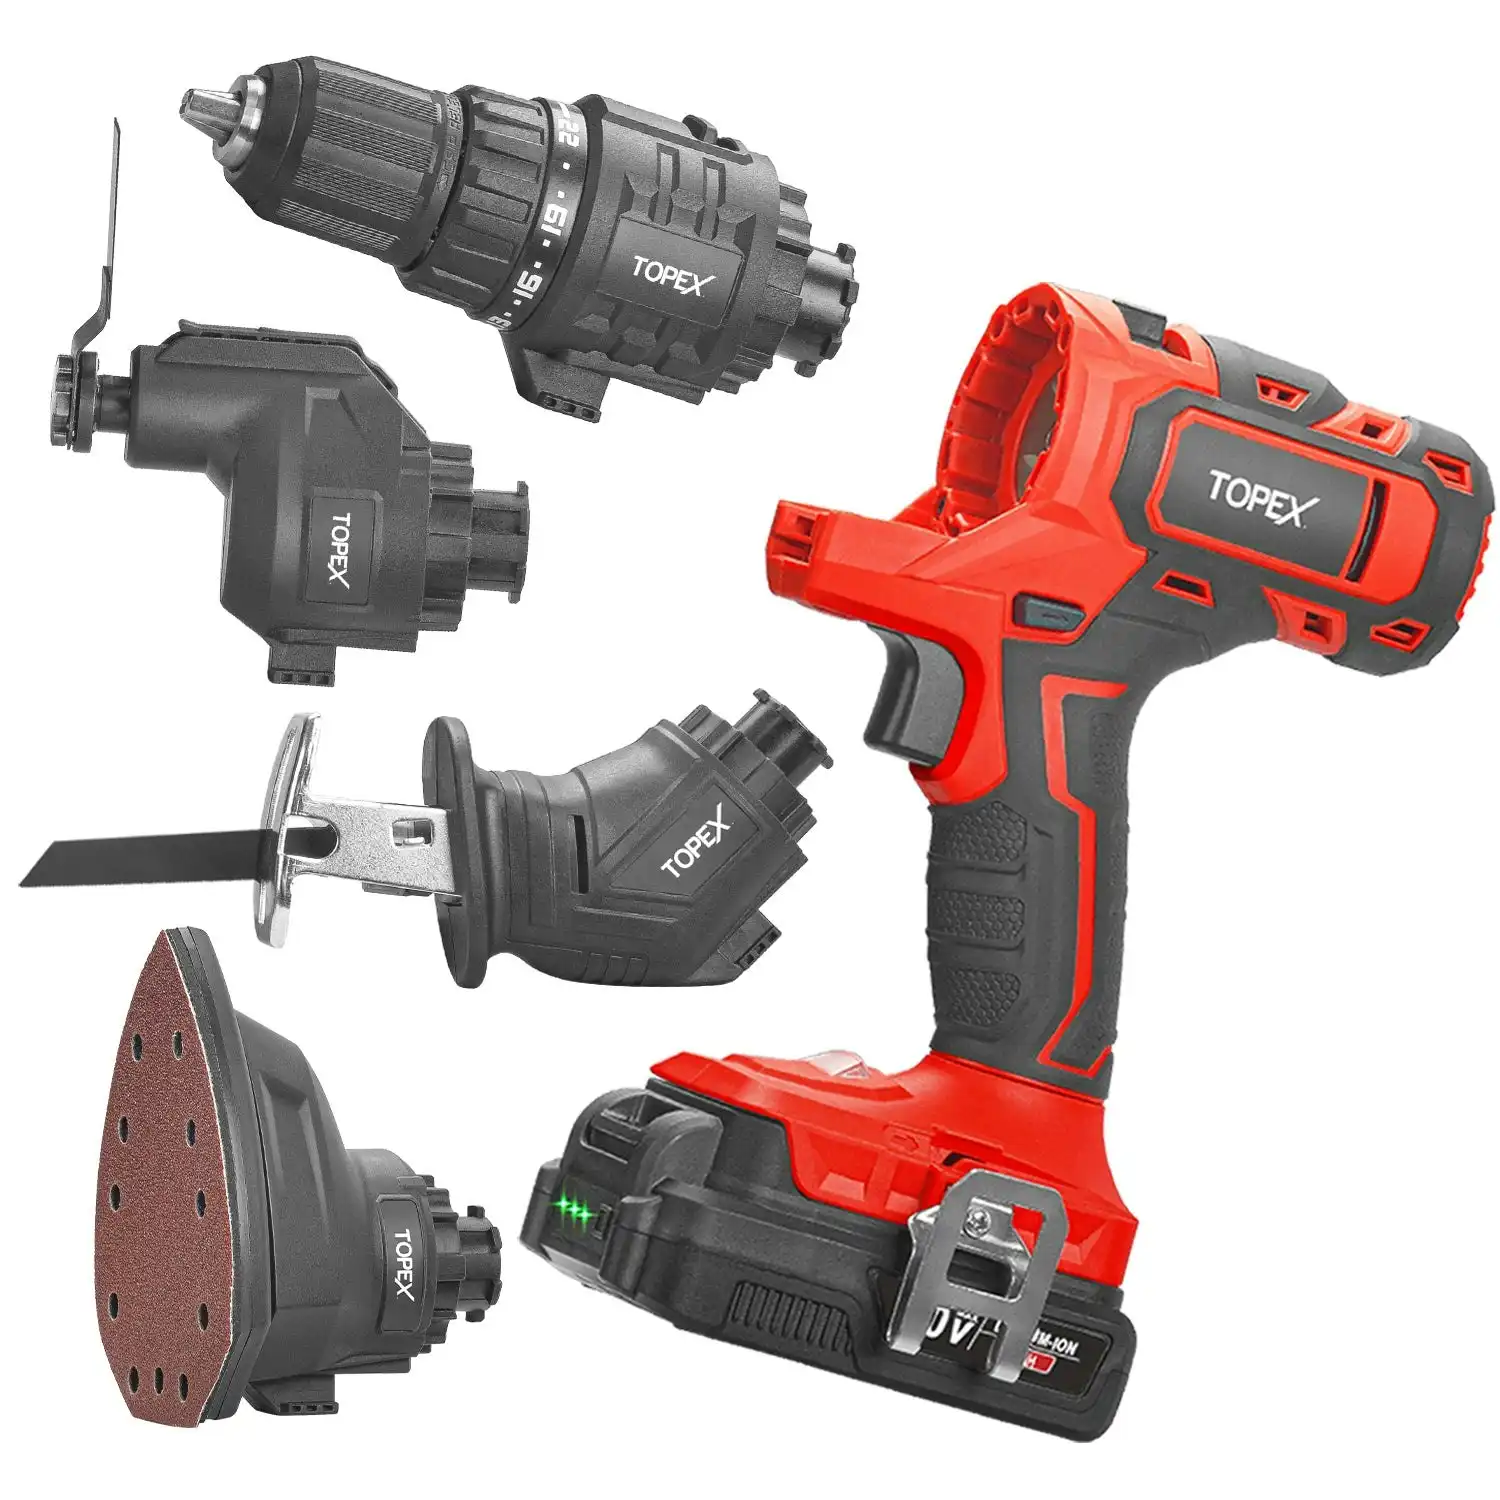 Topex 20V 4IN1 Multi-Tool Combo Kit Cordless Drill Sander Reciprocating Saw Oscillating Tool